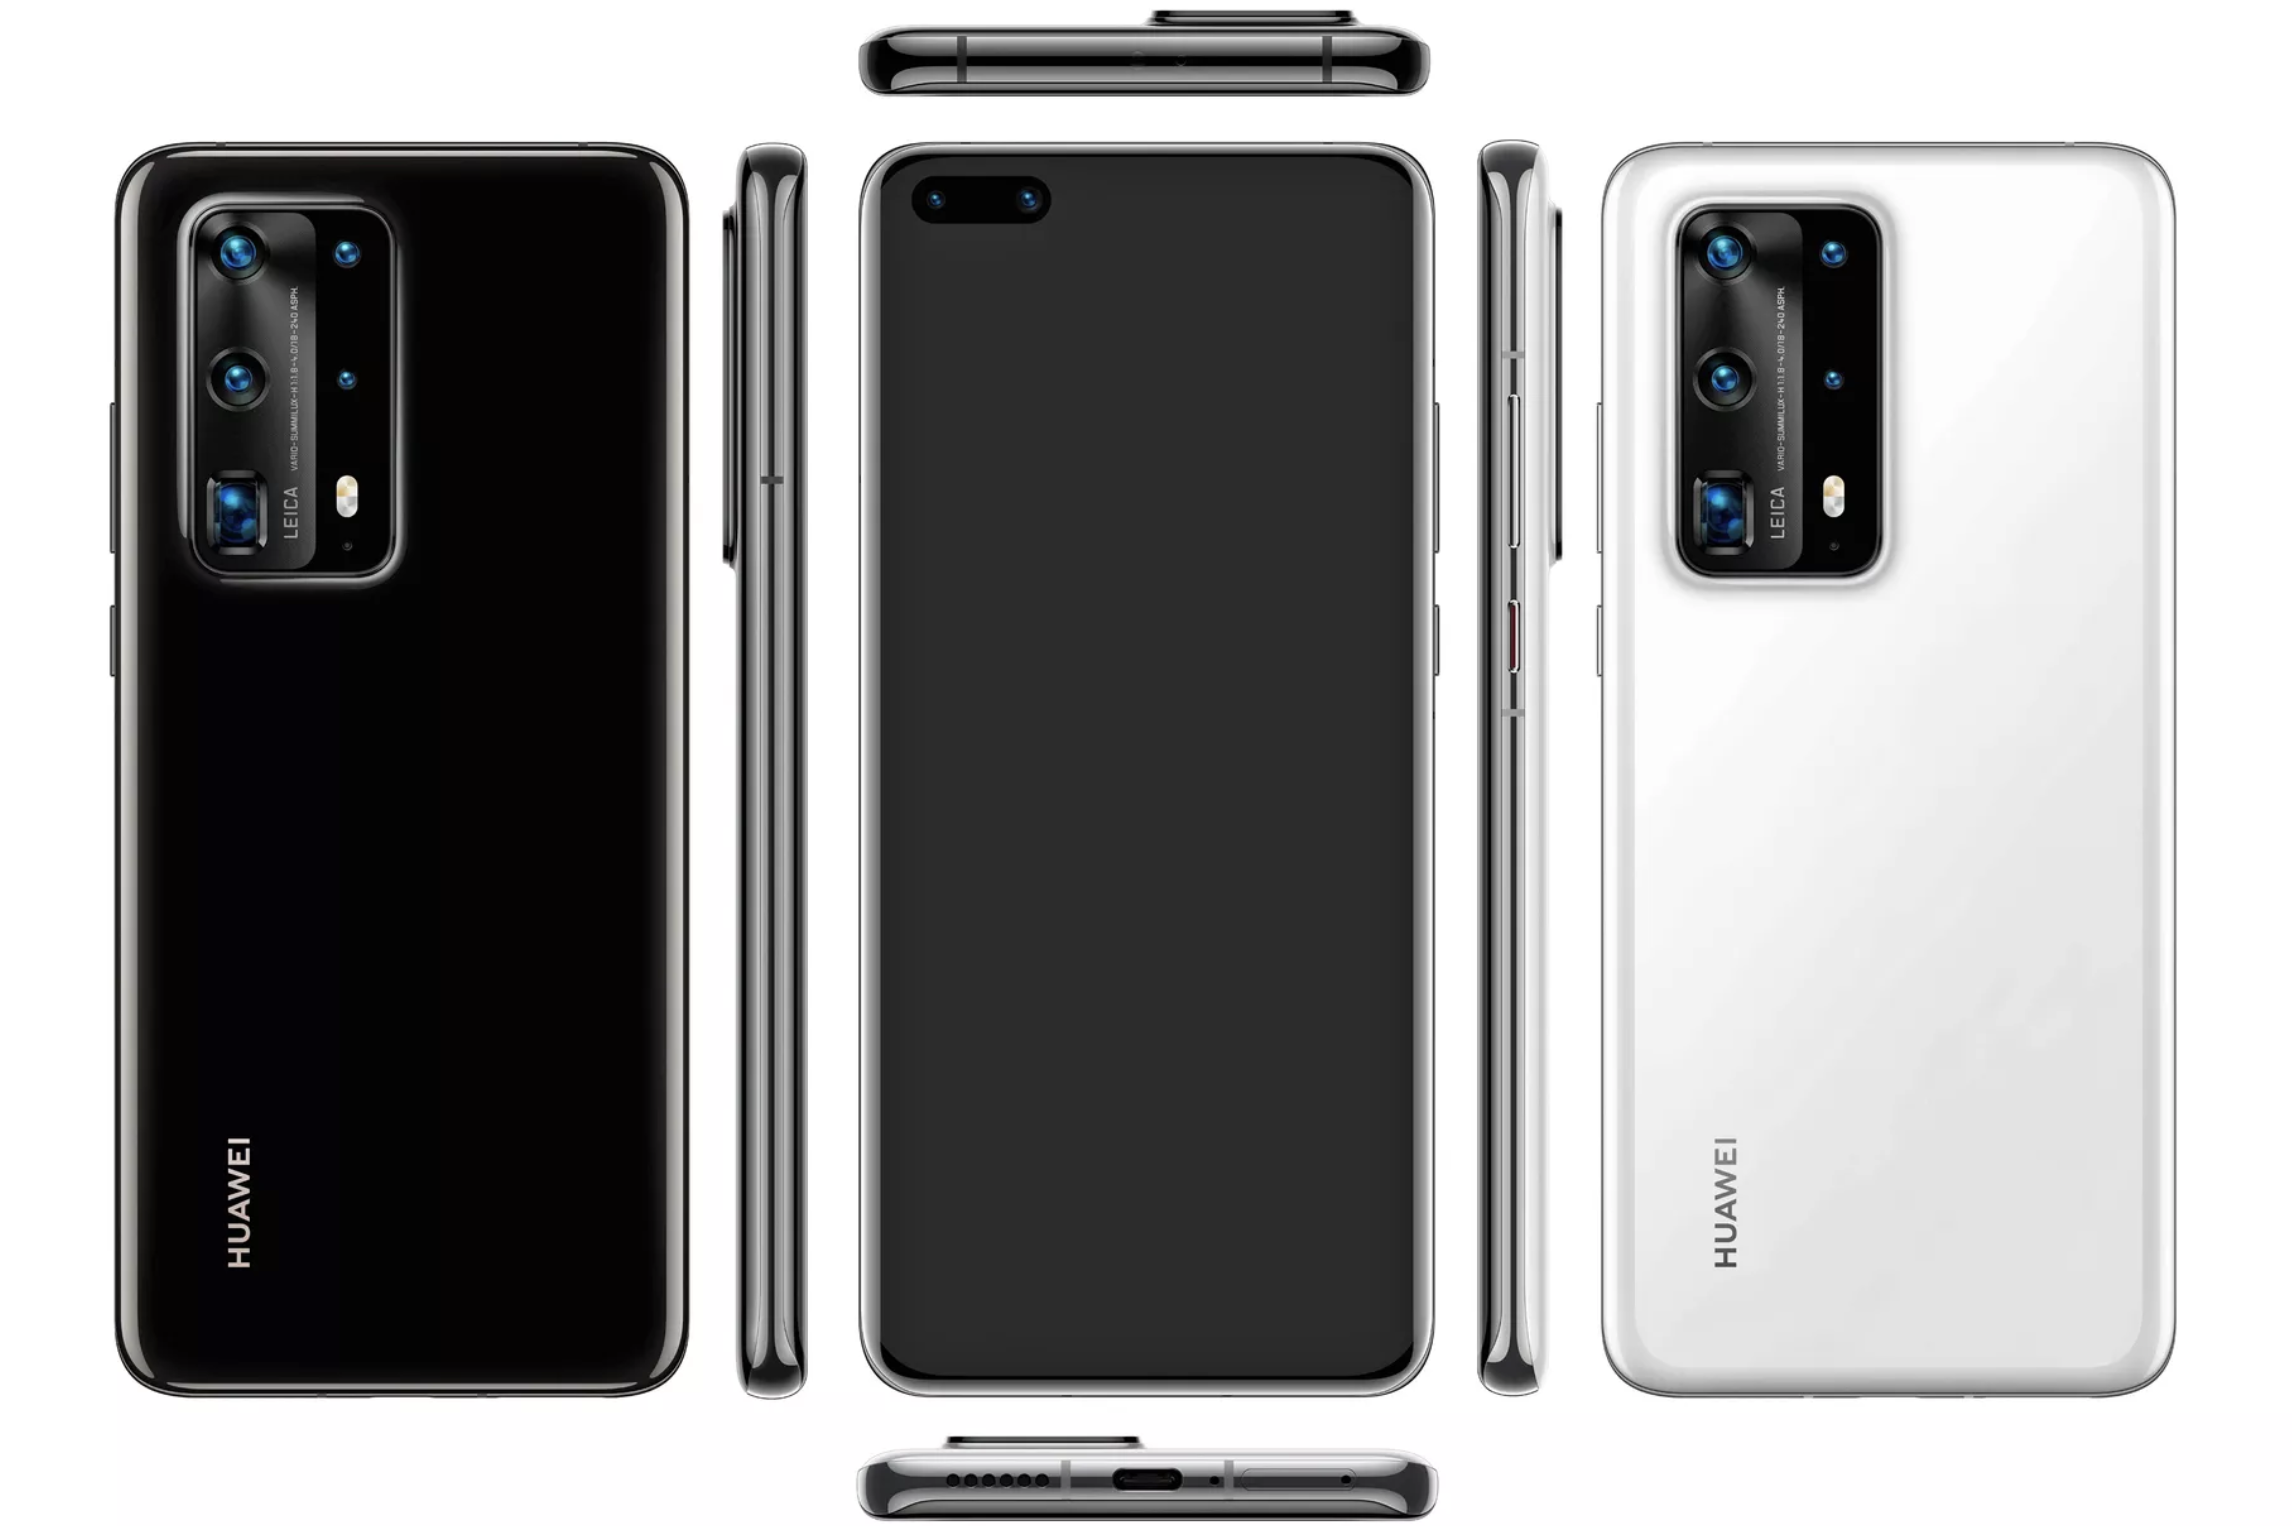 What will the Huawei P40 Pro look like?